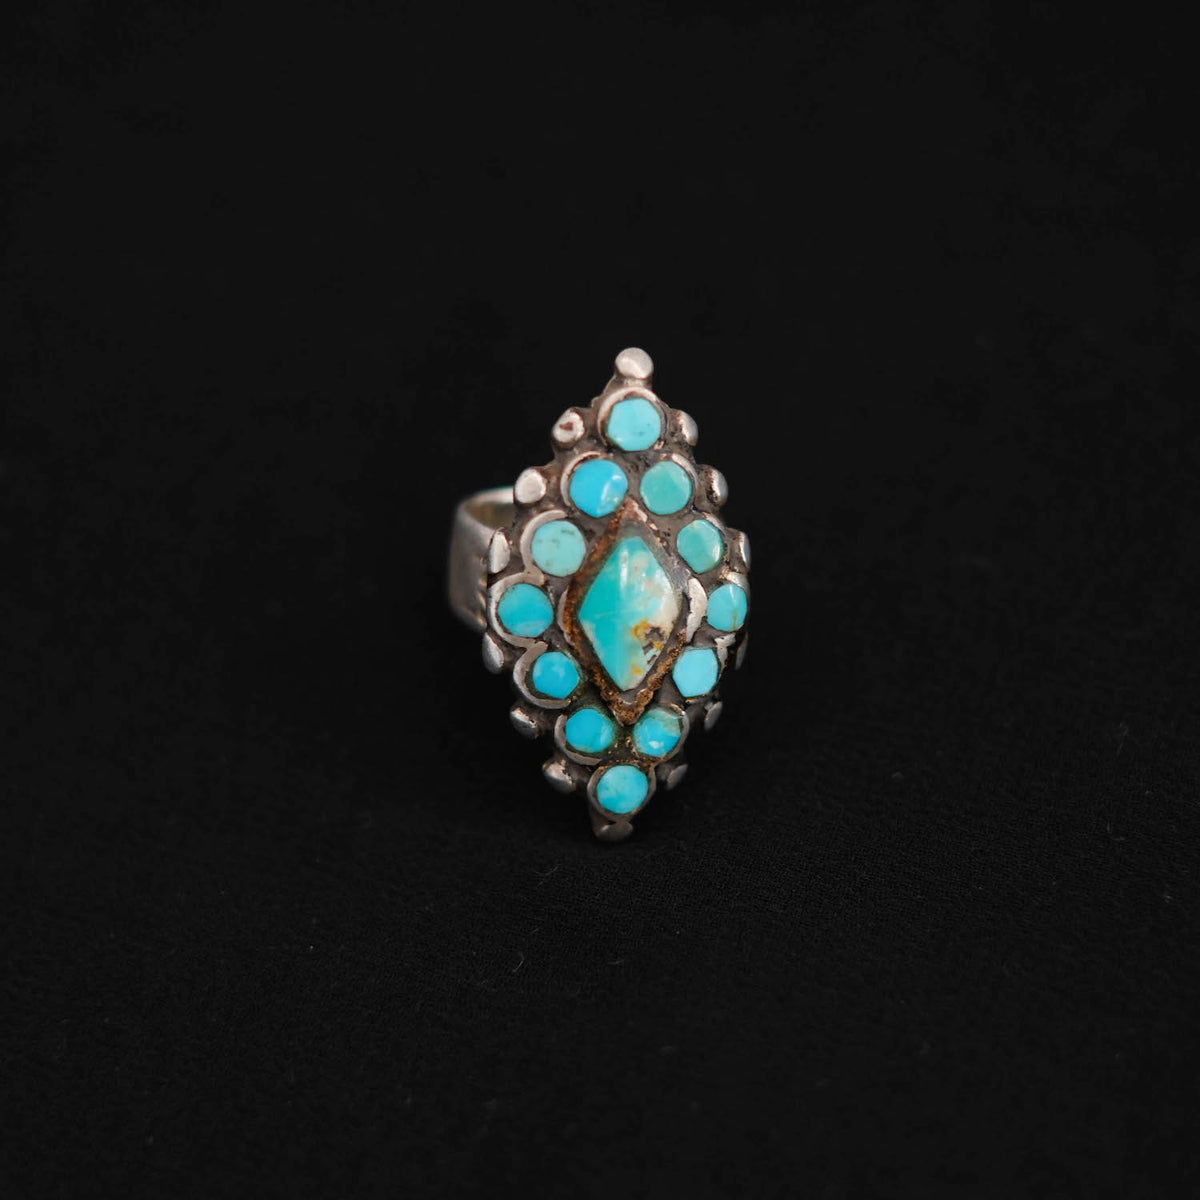 Anillo antiguo de Paquistán hecho a mano con plata y  13 turquesas. Tamaño 11 Peso  15 g. Old silver ring with turquoise. Old ring from Pakistan. Lula Máiz